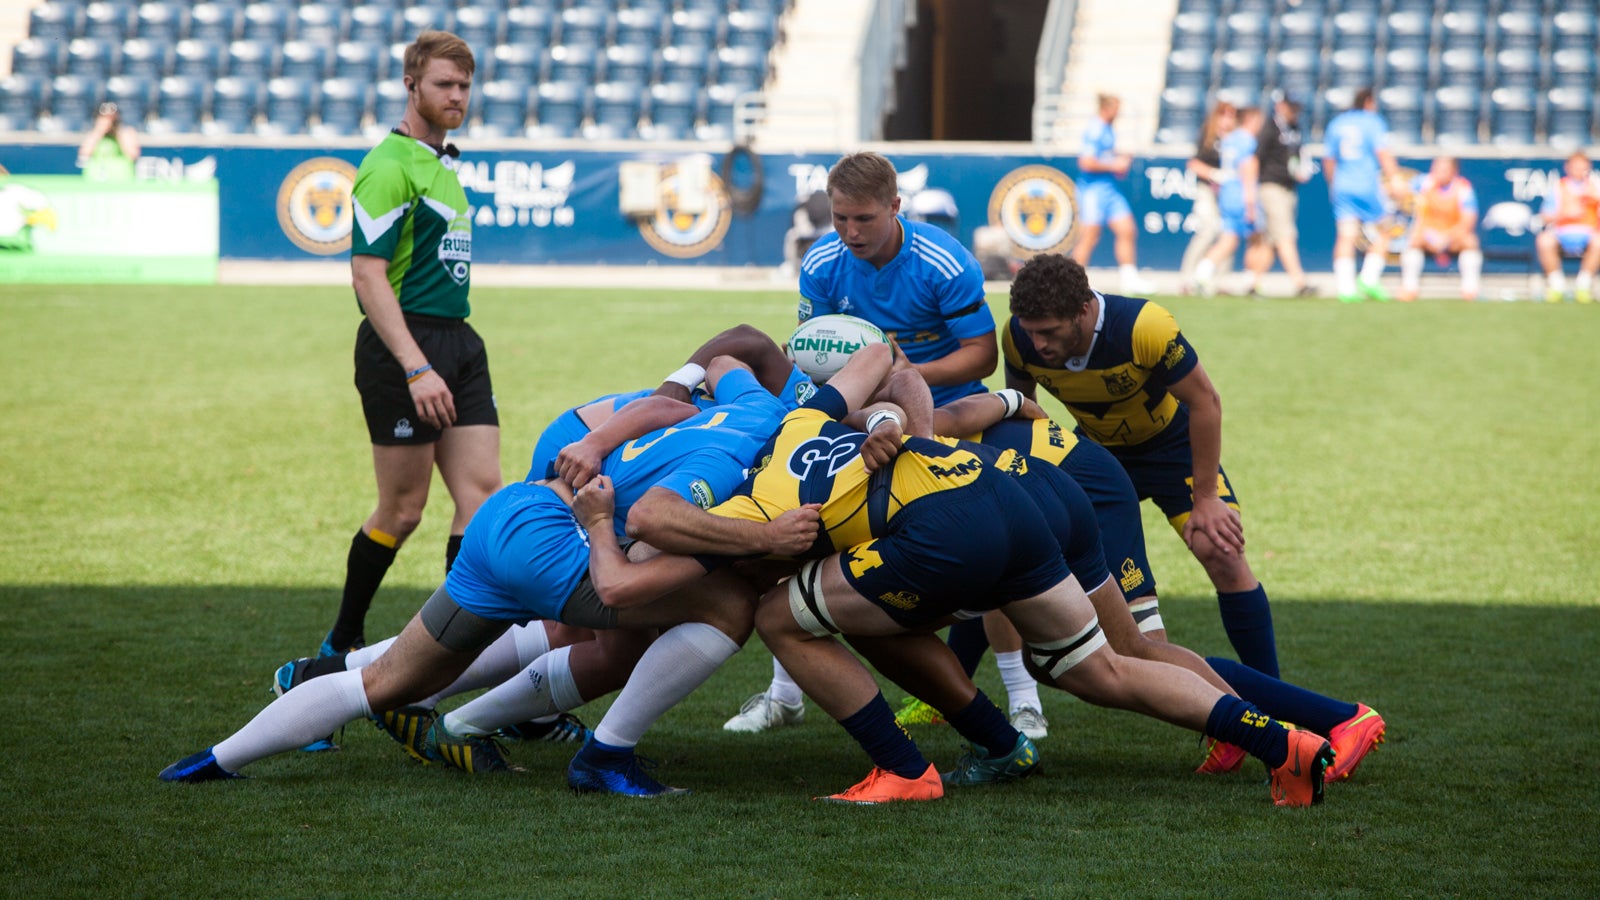 A scrum between University of Michigan and UCLA during this weekends Collegiate Rugby National Championship at Talen Energry Stadium. (Brad Larrison for NewsWorks)